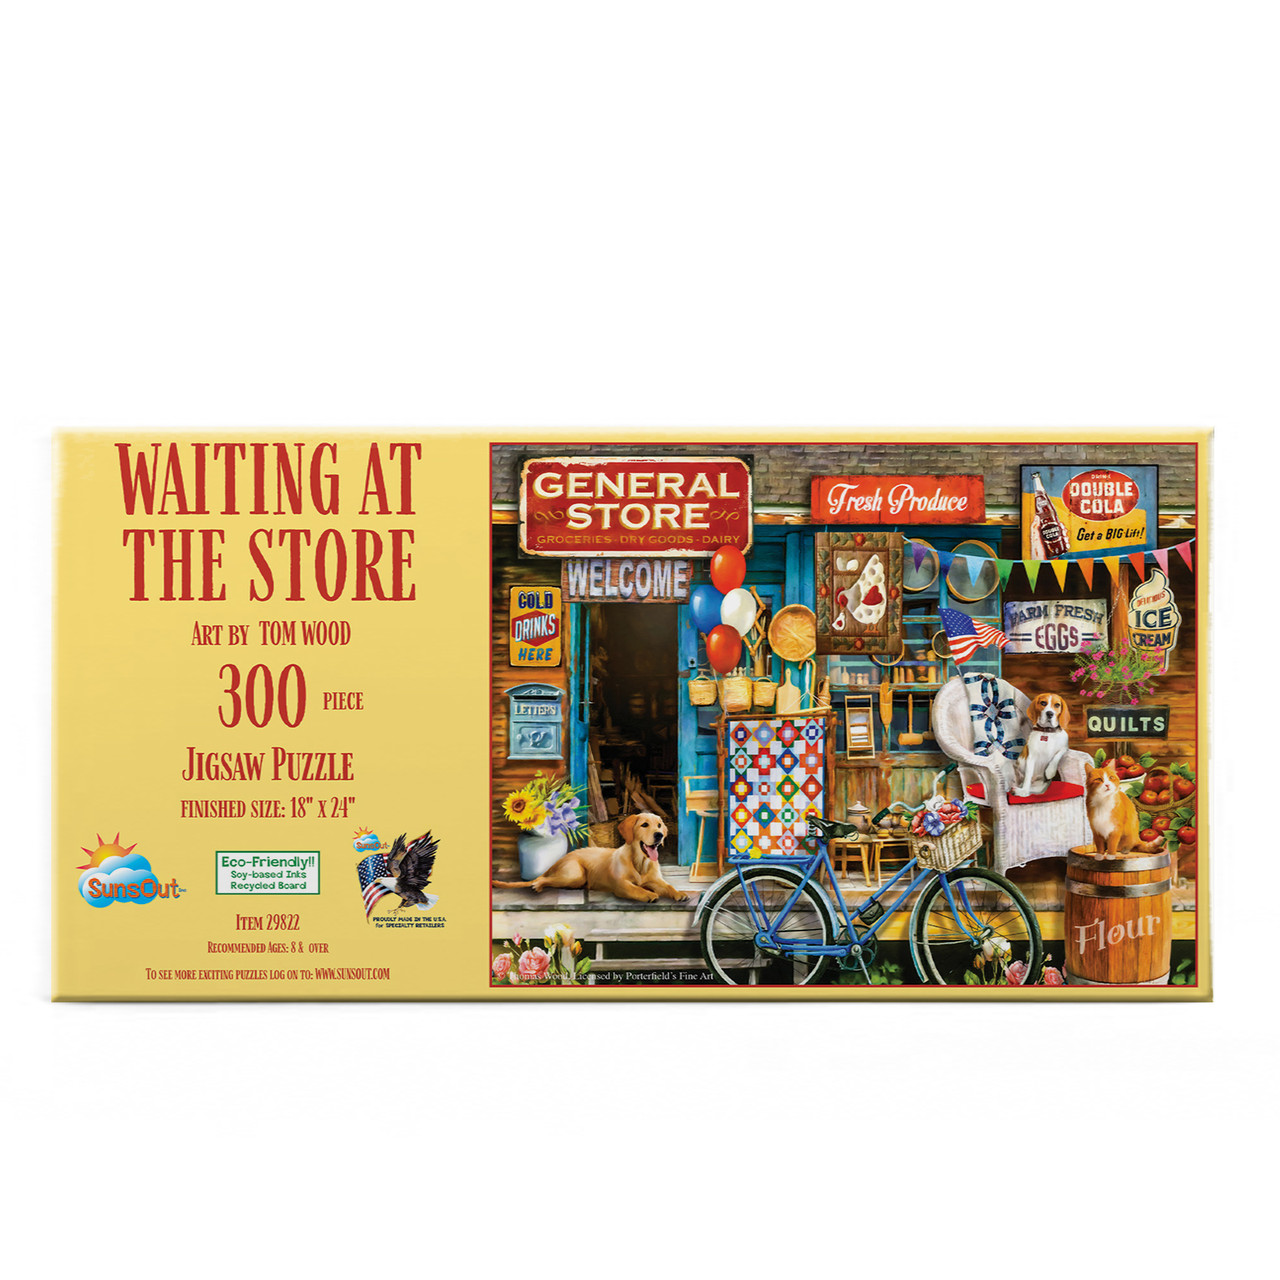 Puzzle Store, Puzzle Accessories, Jigsaw Puzzles, Products